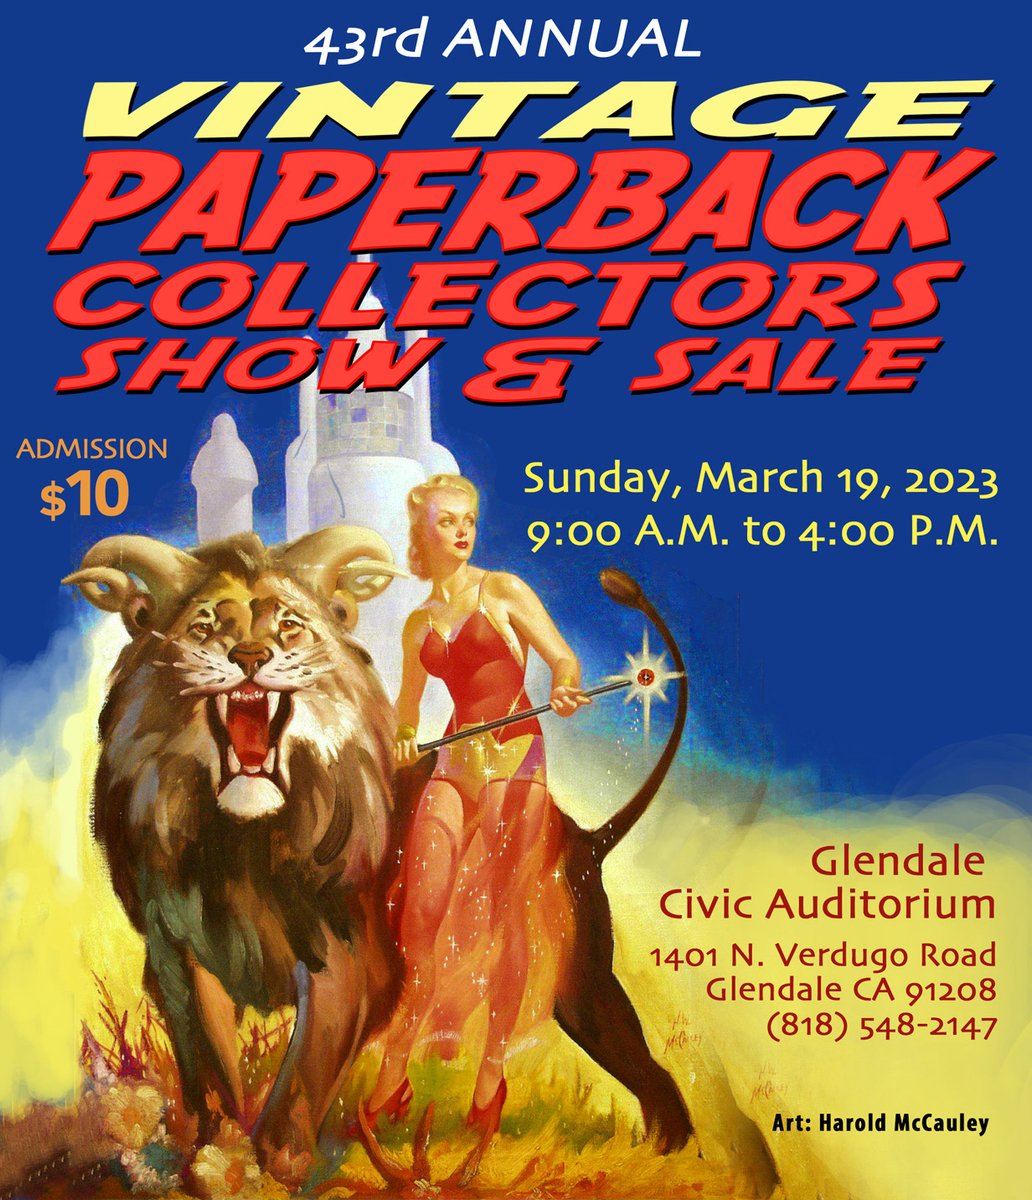 Come visit us this Sunday March 19th at the LA Vintage Paperback Collectors Show in #Glendale, CA! It is always a lot of fun. We are in booth 70 and 71.
#LAVintagePaperbackShow #vintagepaperbacks